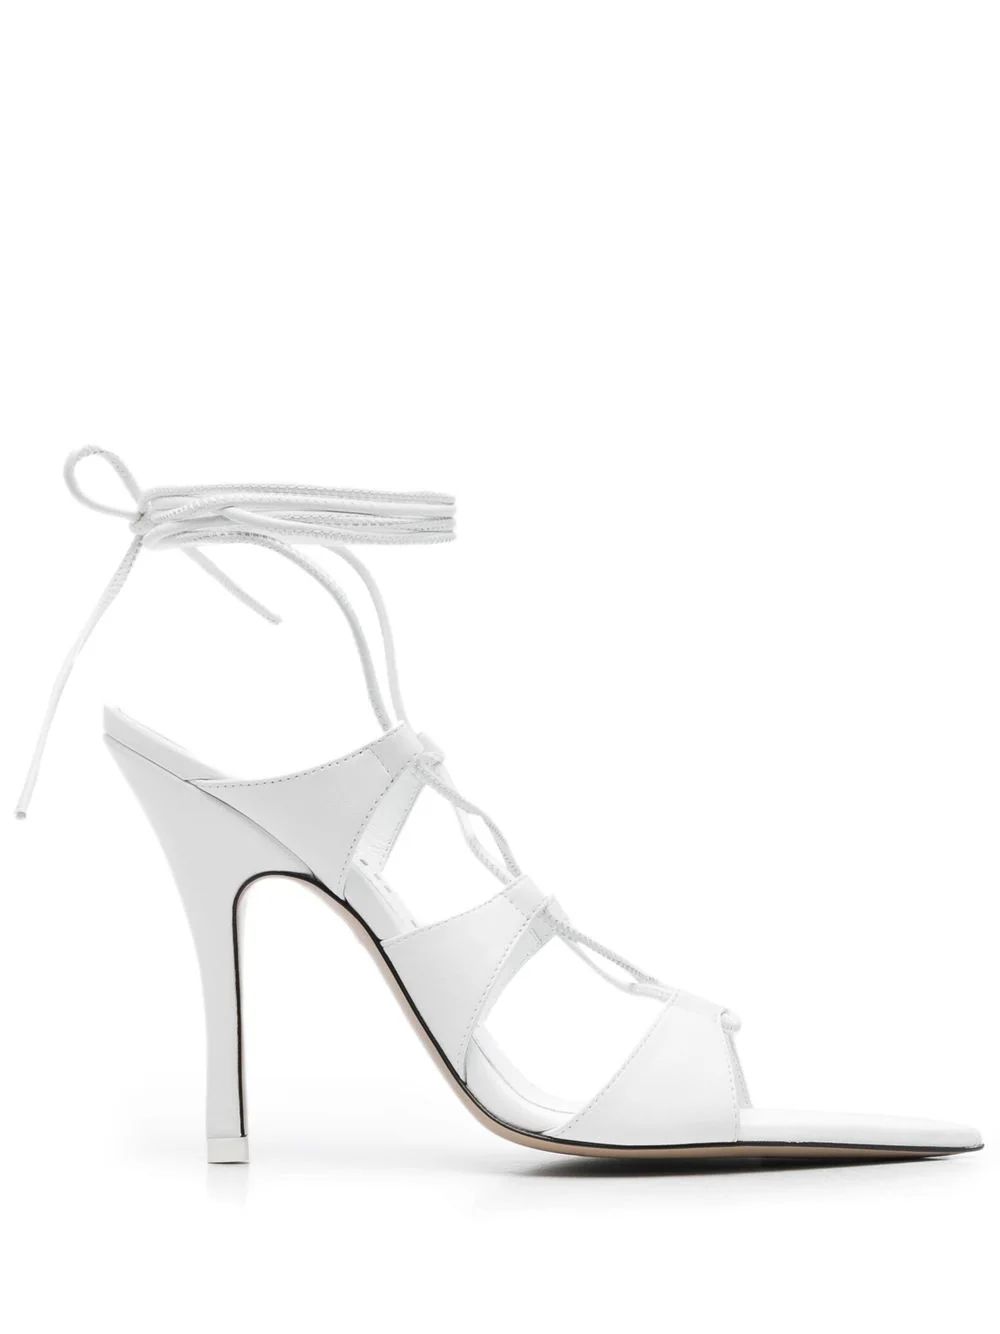 Renee lace-up 120mm sandals | Farfetch Global